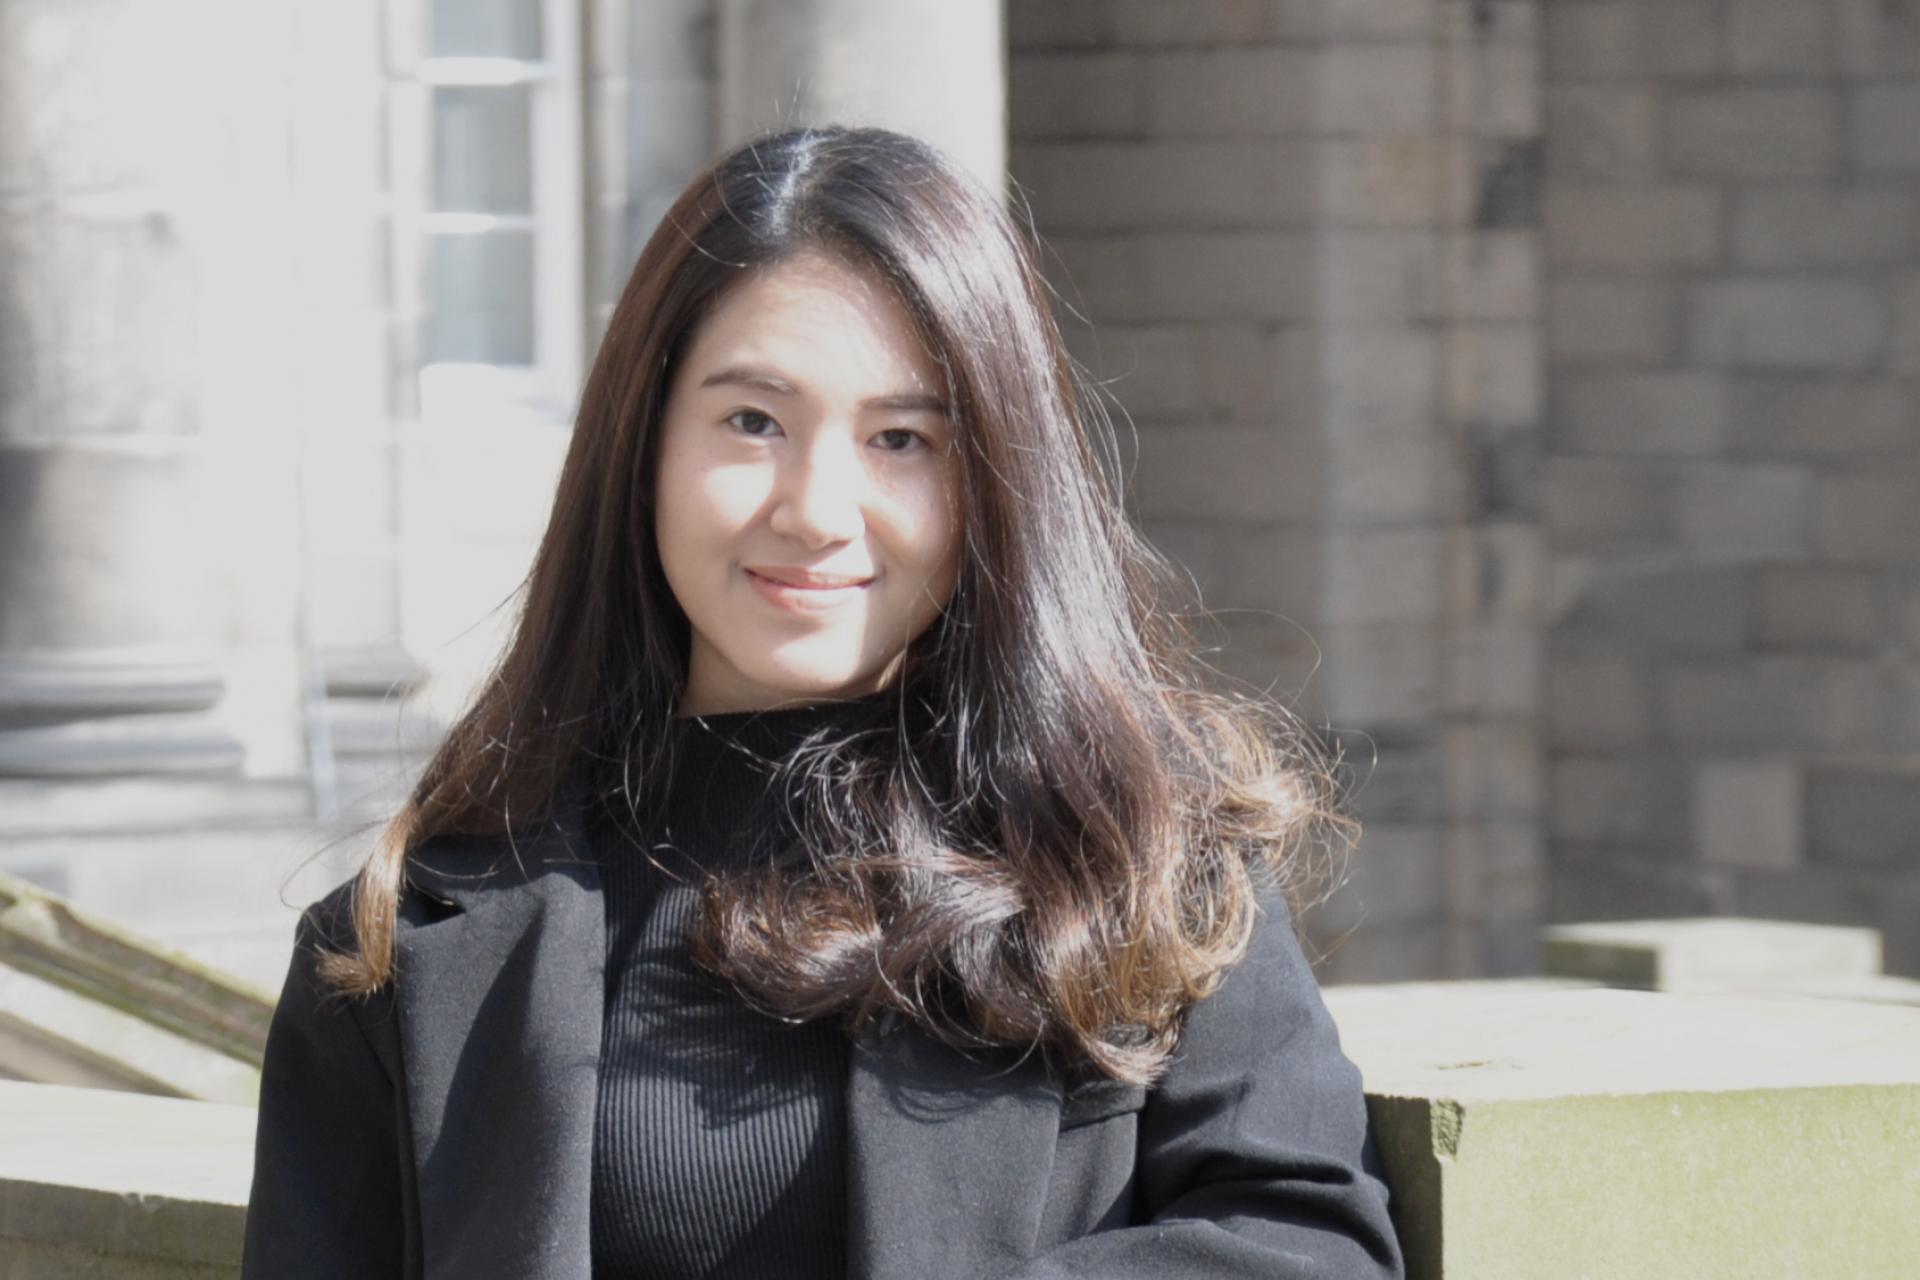 Paphawarin Thongtumlung, LLM in International Banking Law and Finance, 2019